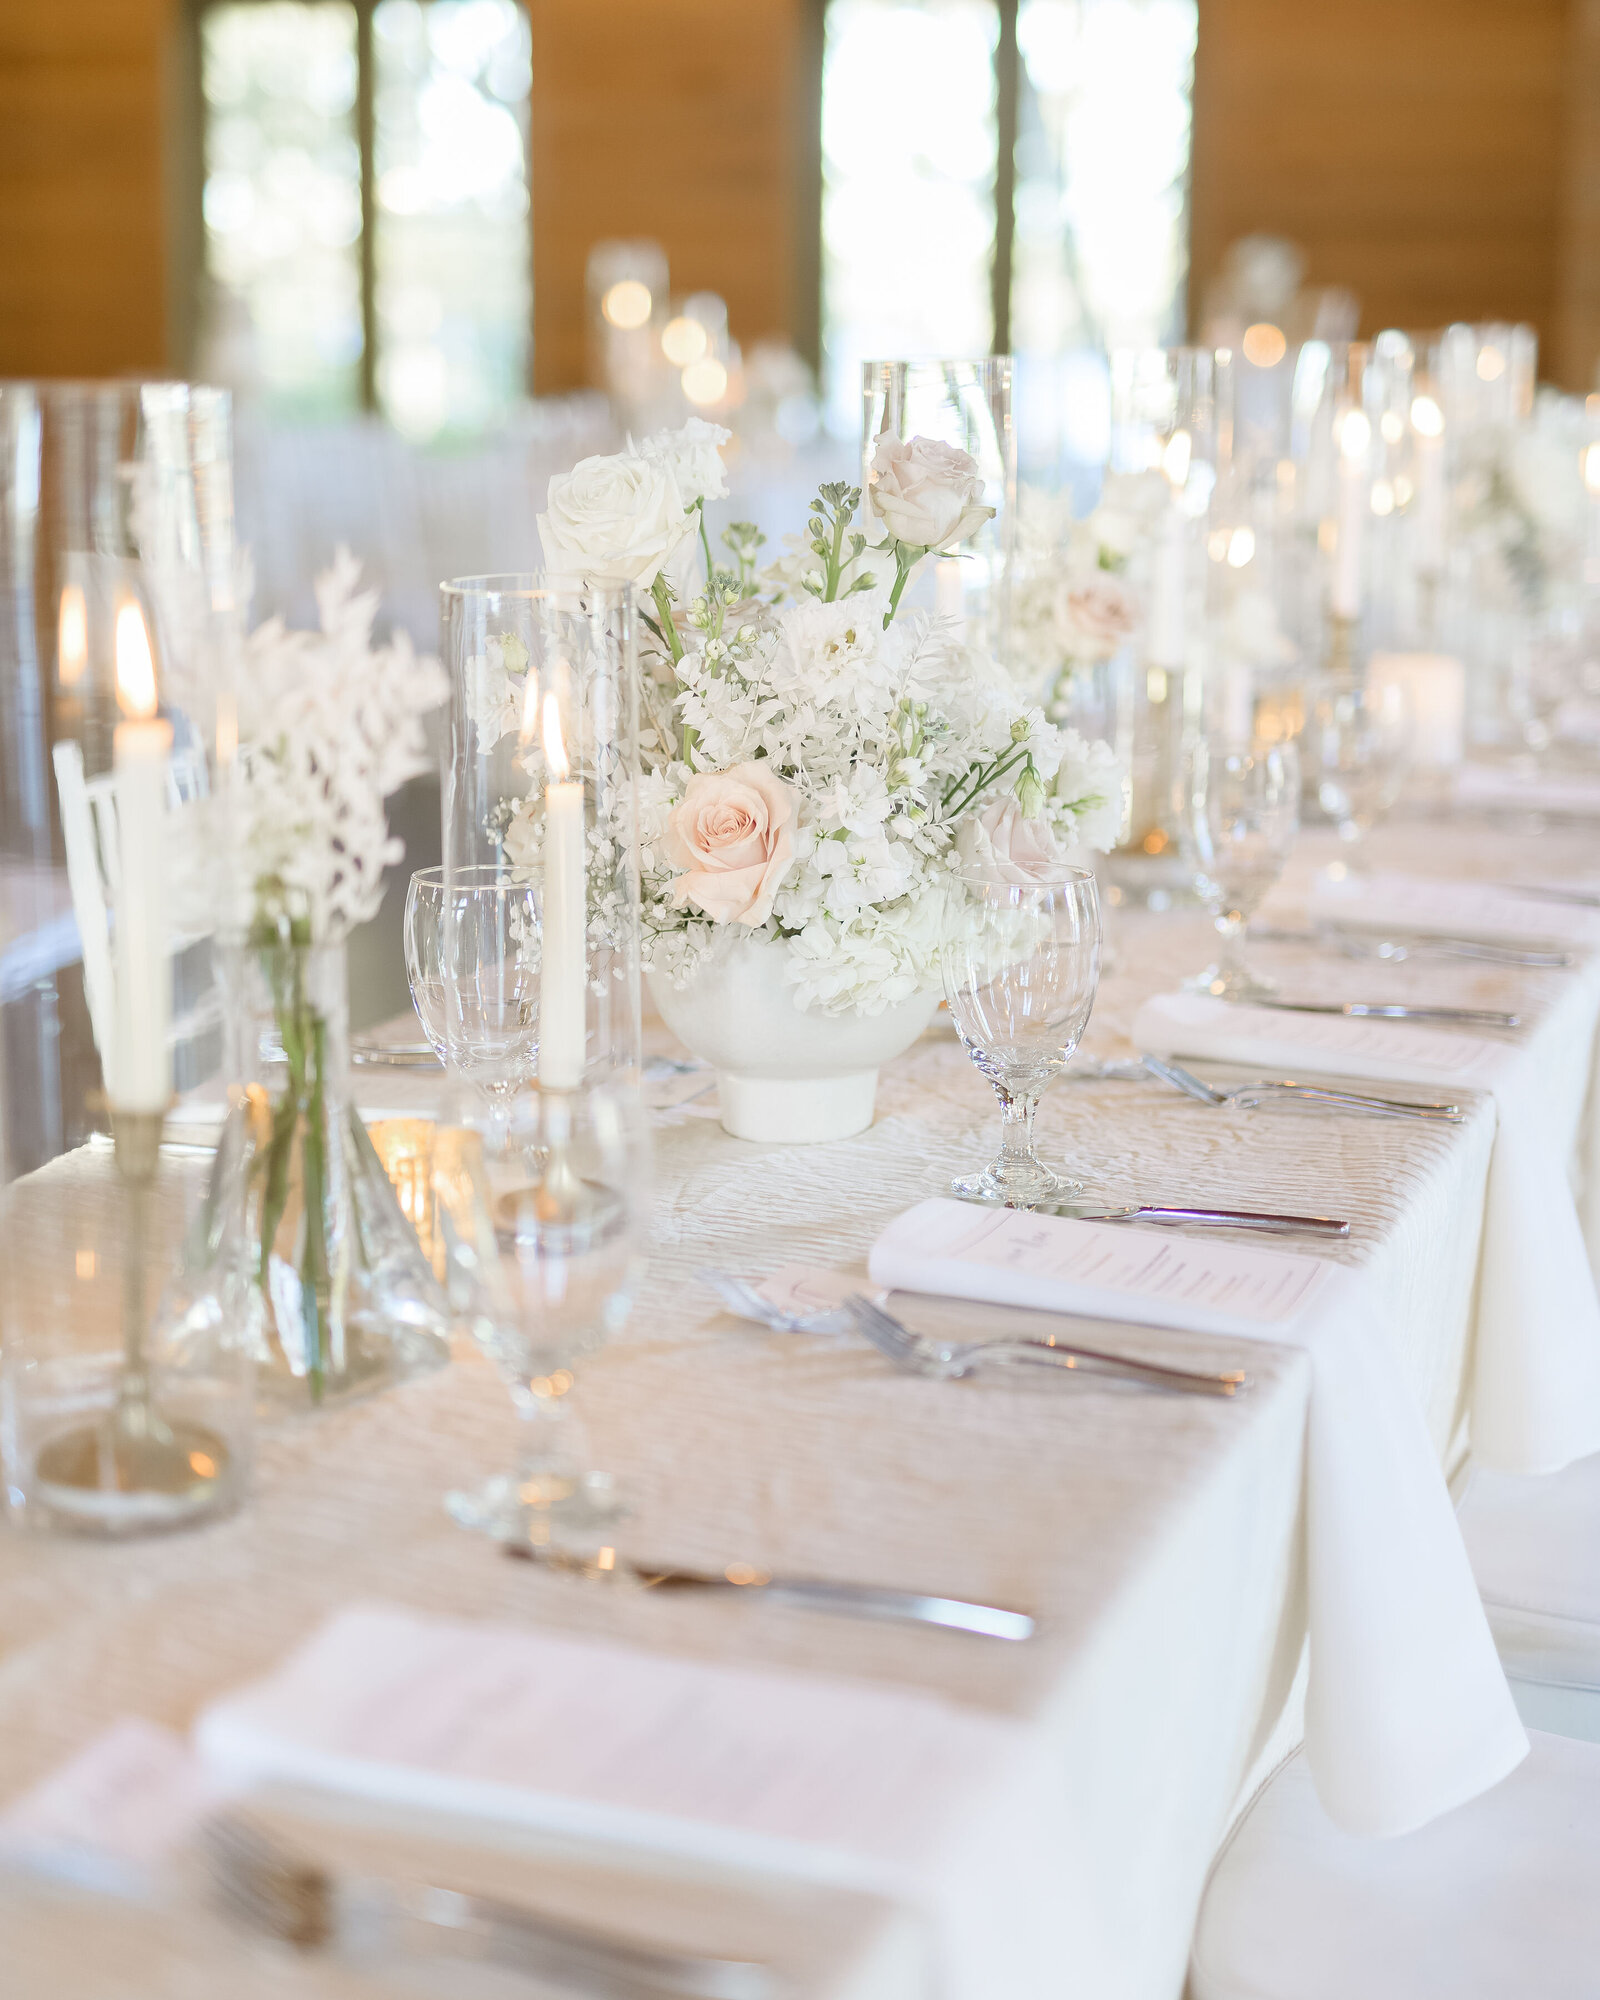 Table details from Miranda Stallings Photography